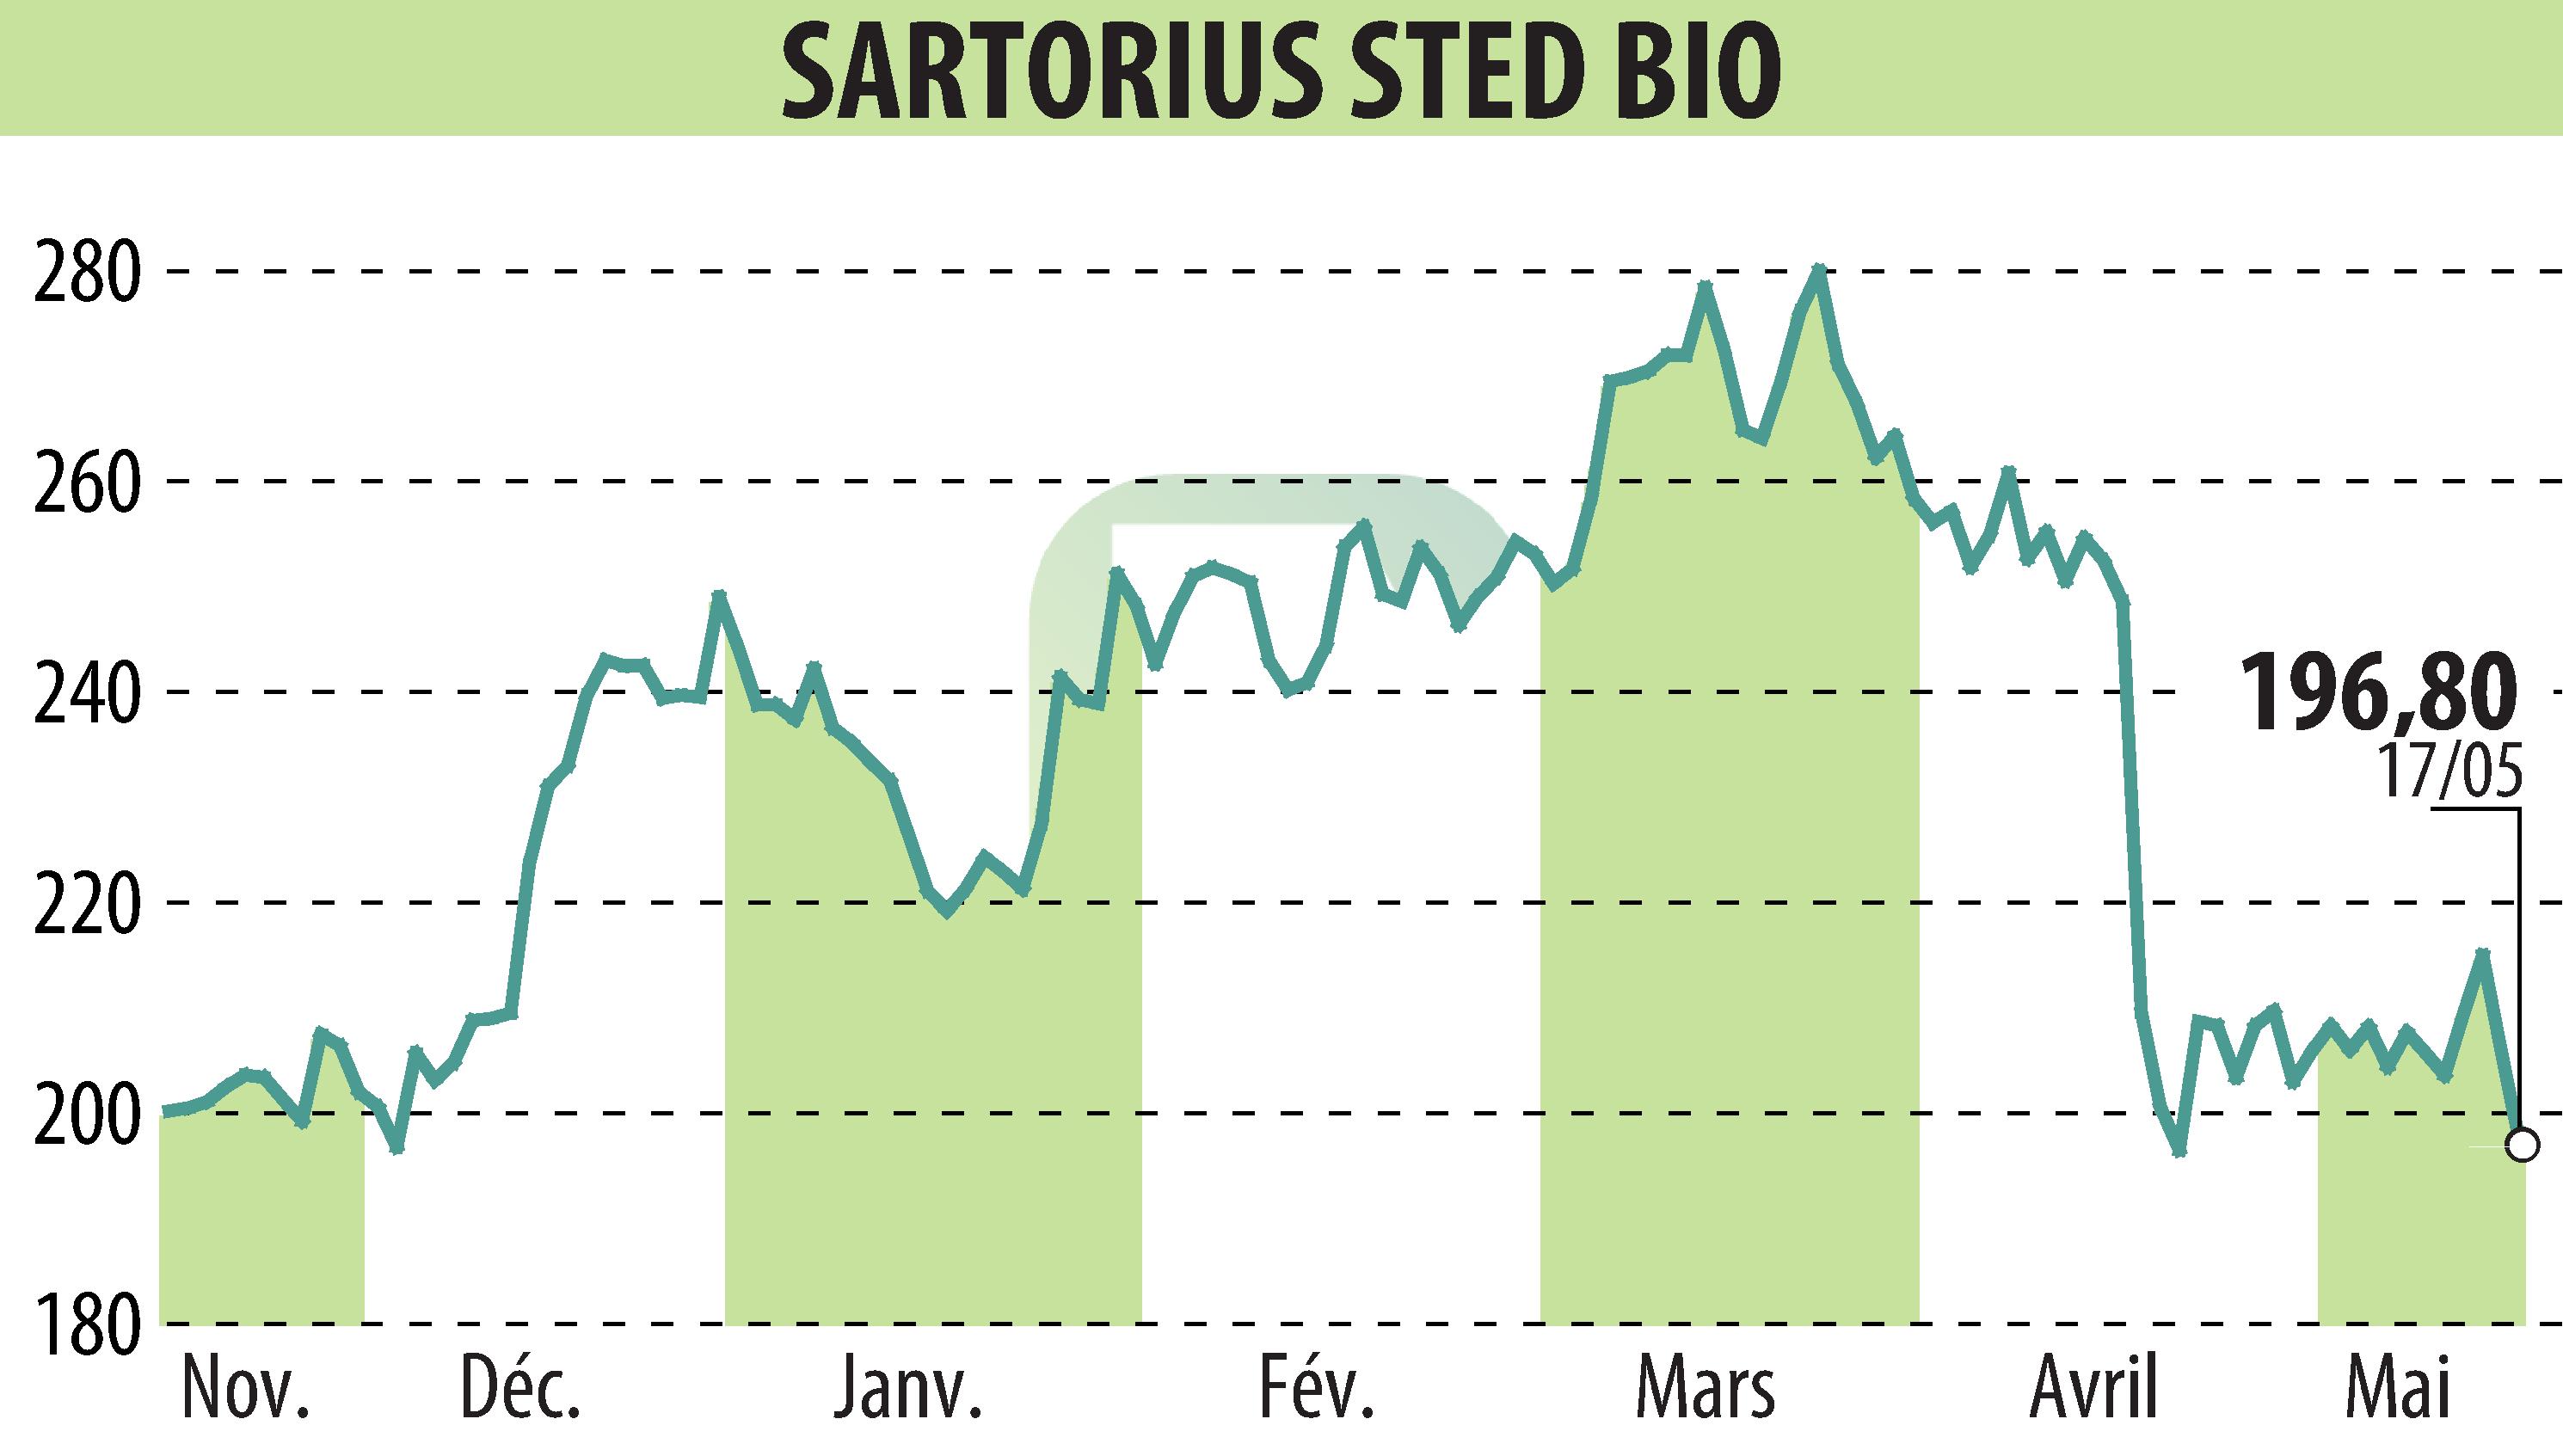 Stock price chart of SARTORIUS STED BIO (EPA:DIM) showing fluctuations.